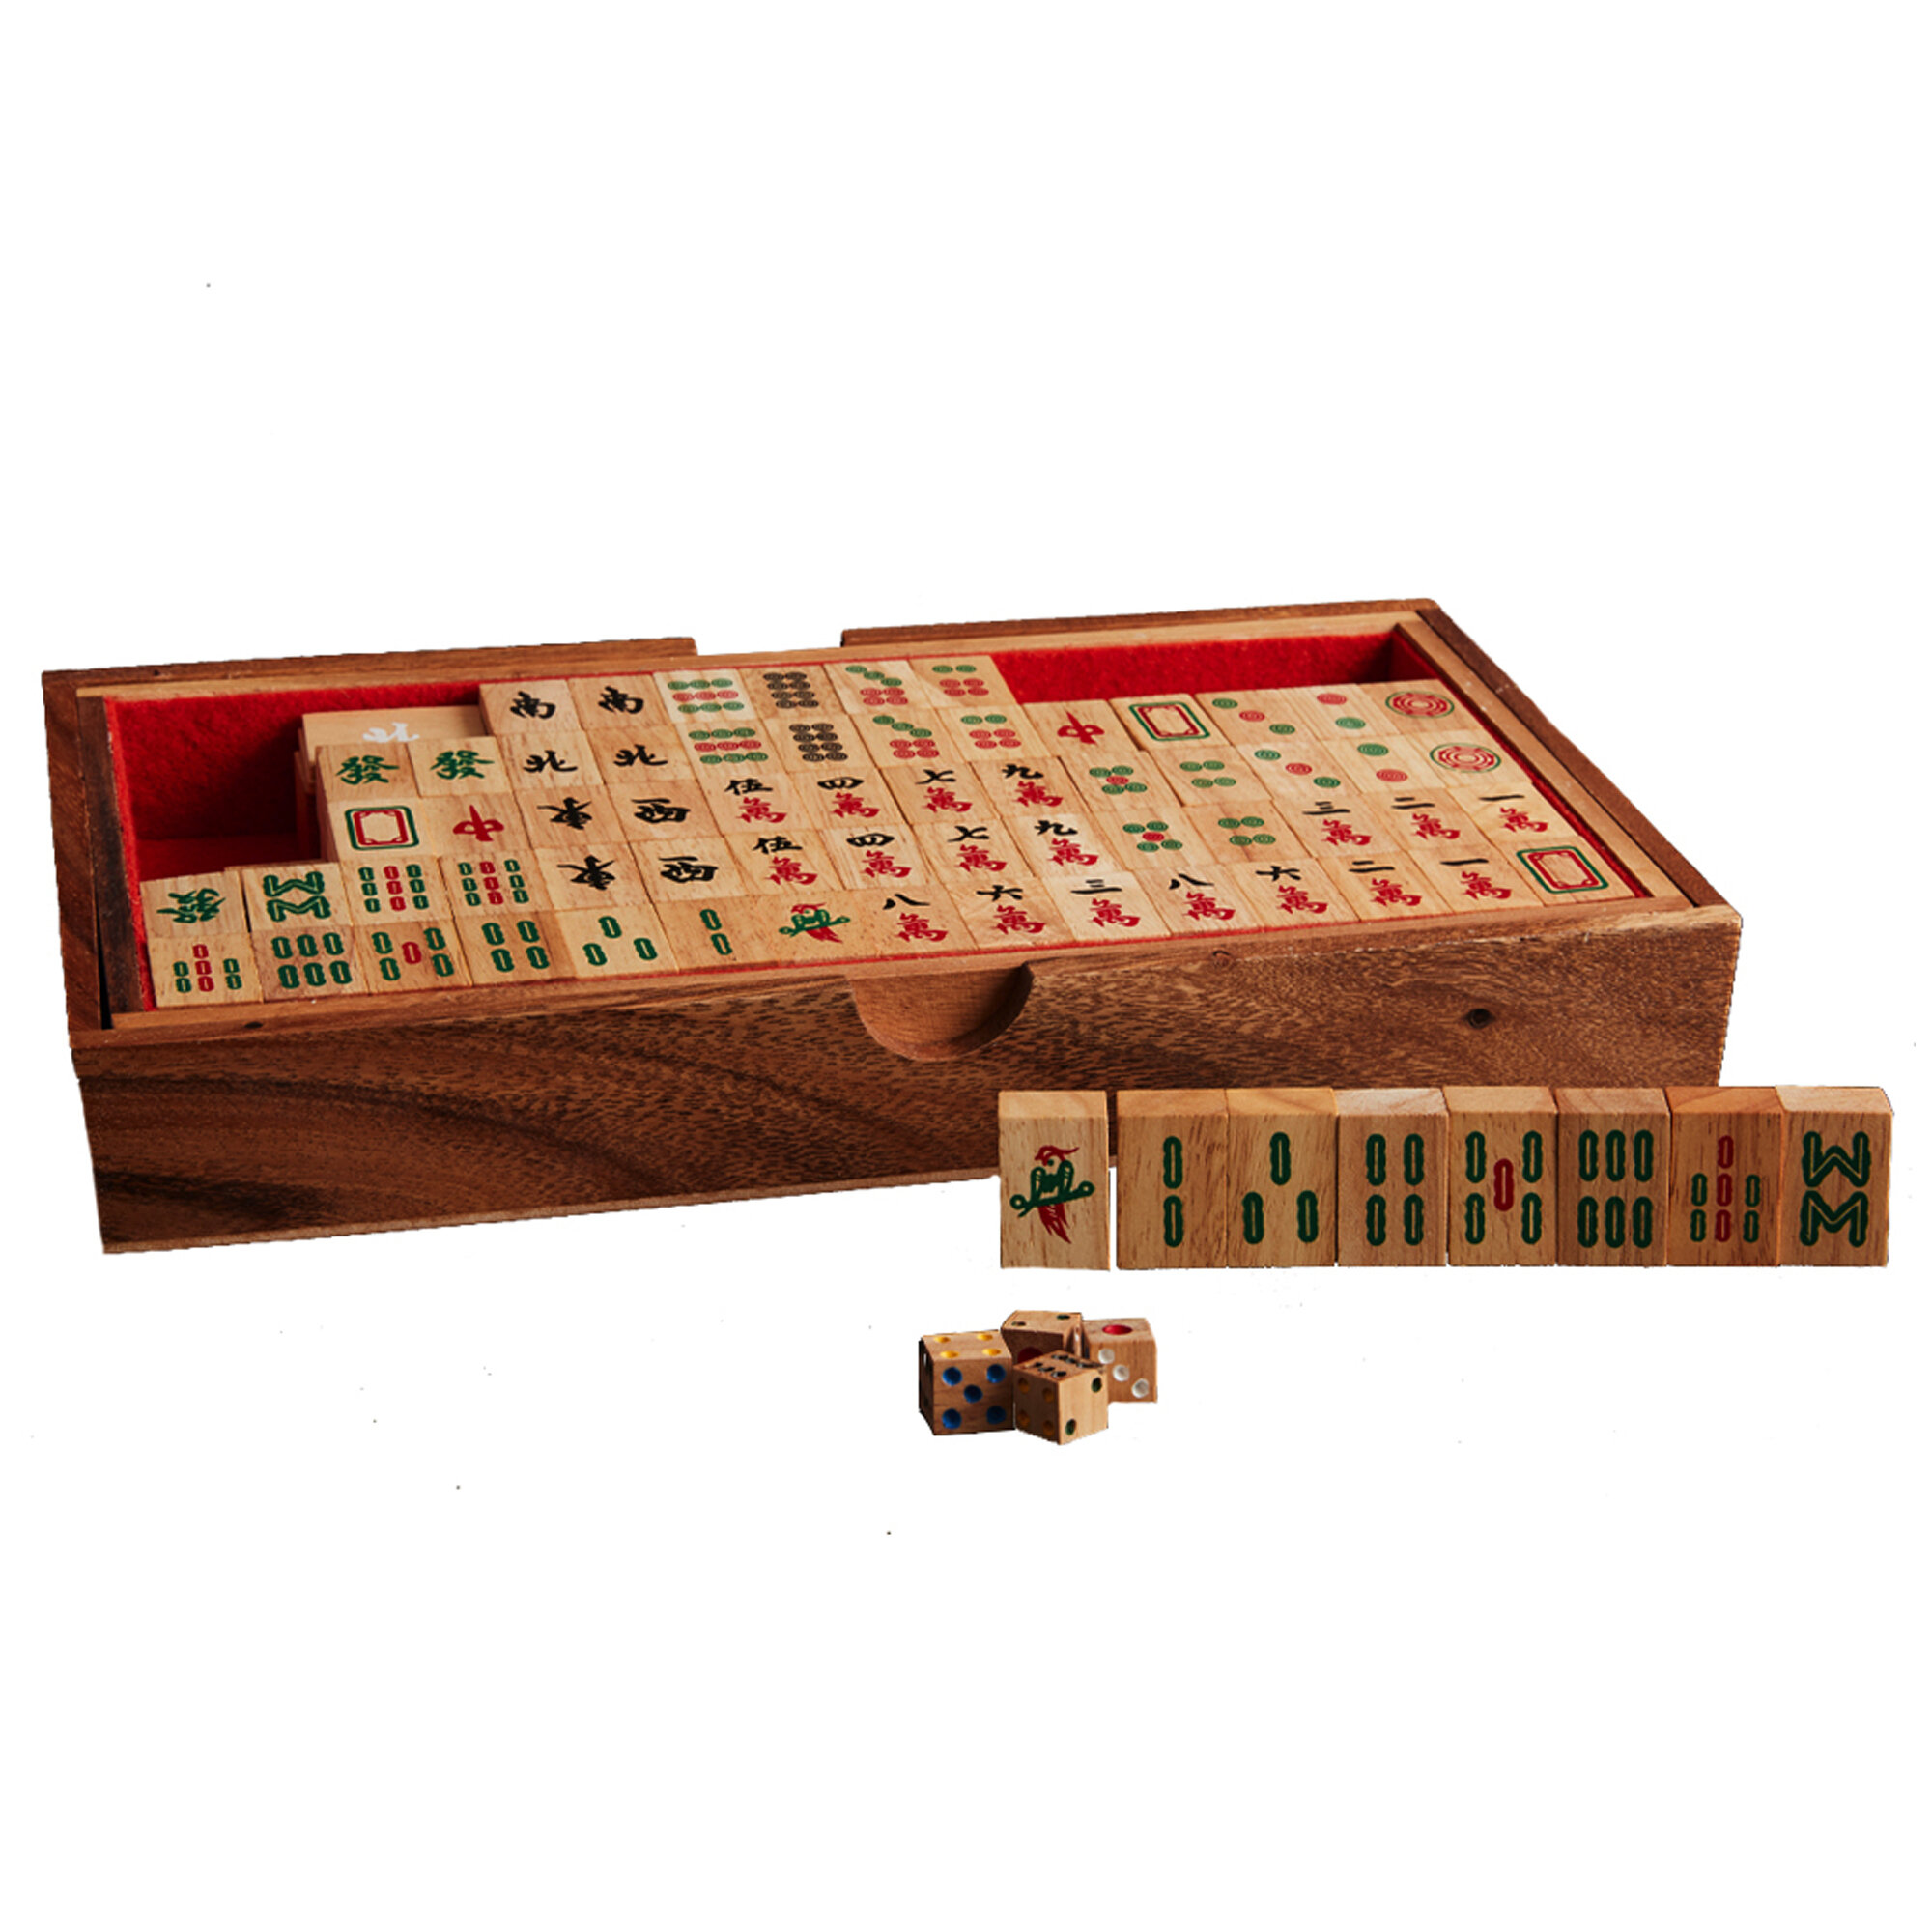 Antique Mahjong Sets: An Antidote to Our Antisocial Internet